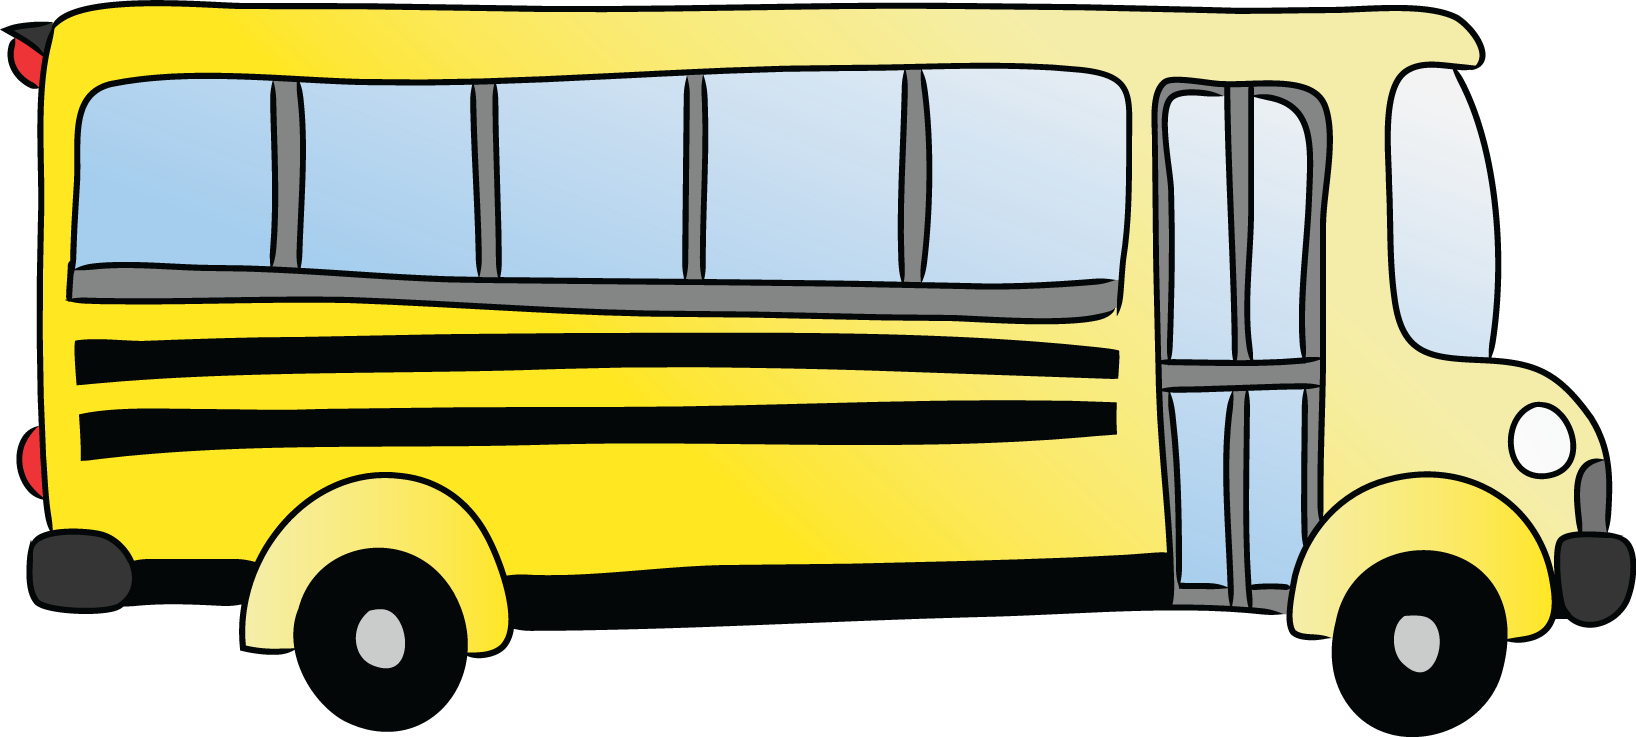 Free School Bus Images Image Png Clipart